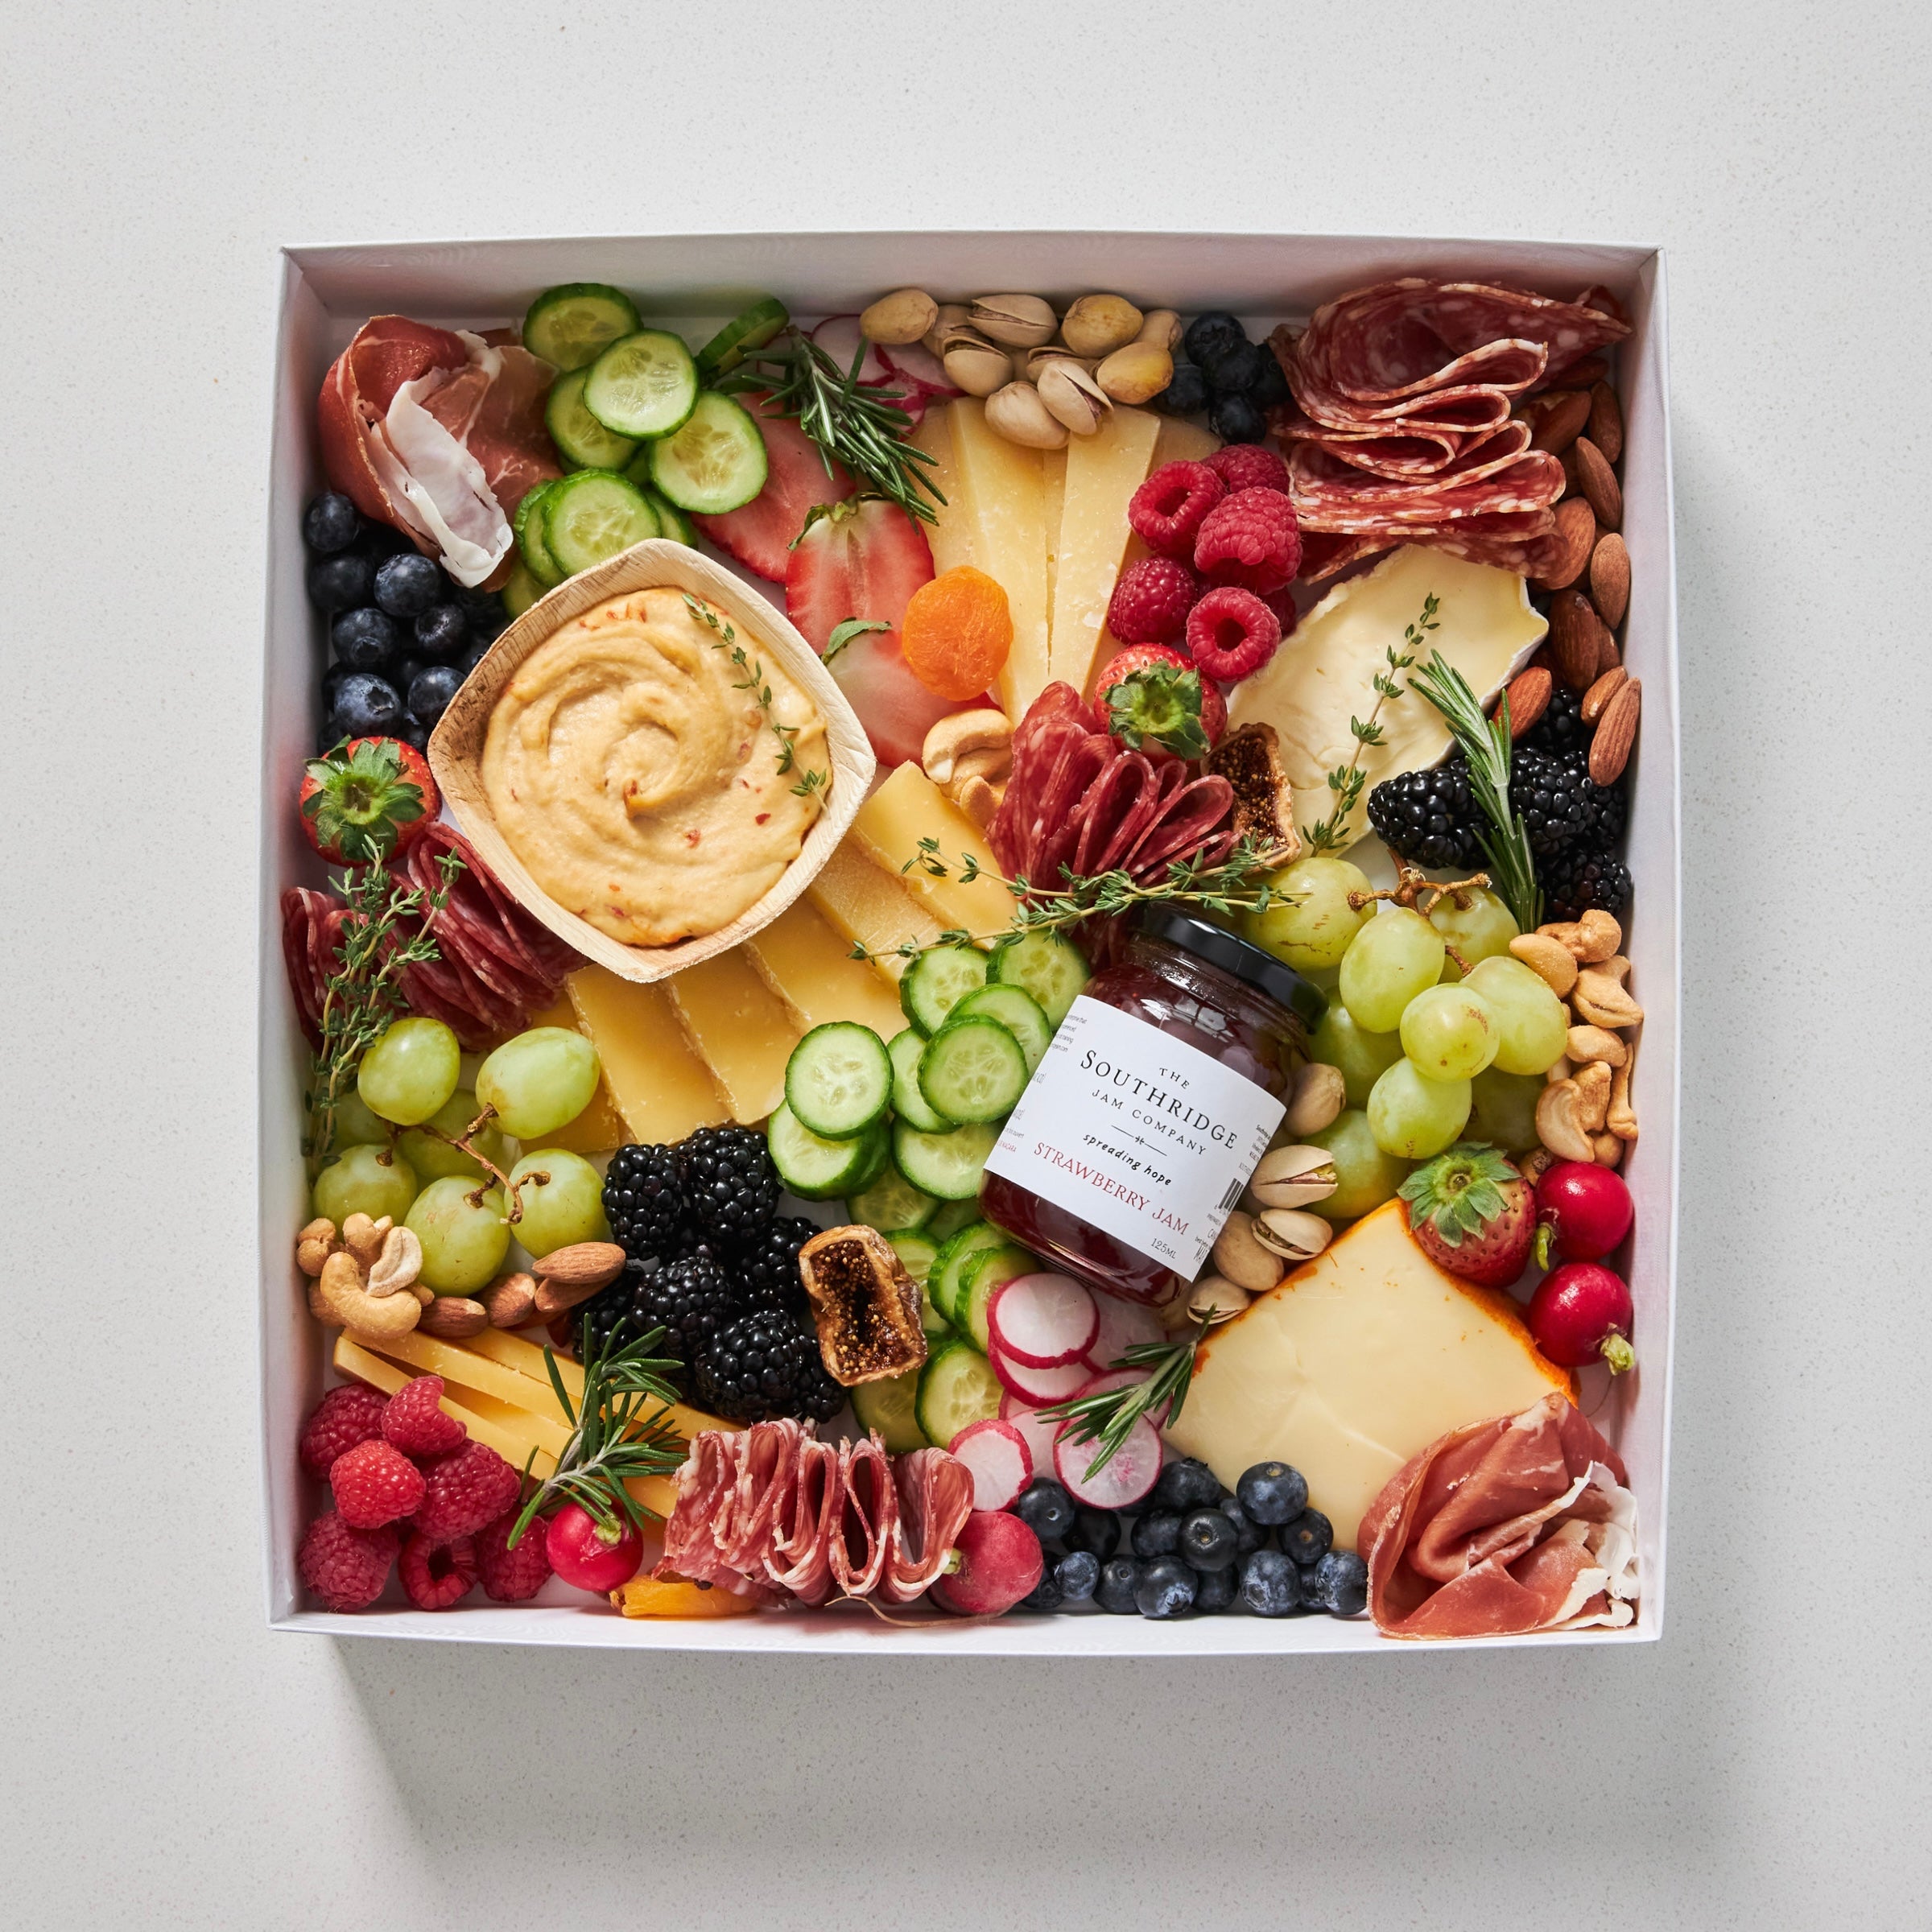 large grazing box with cheese, charcuteries, fruits, vegetables, hummus and jam